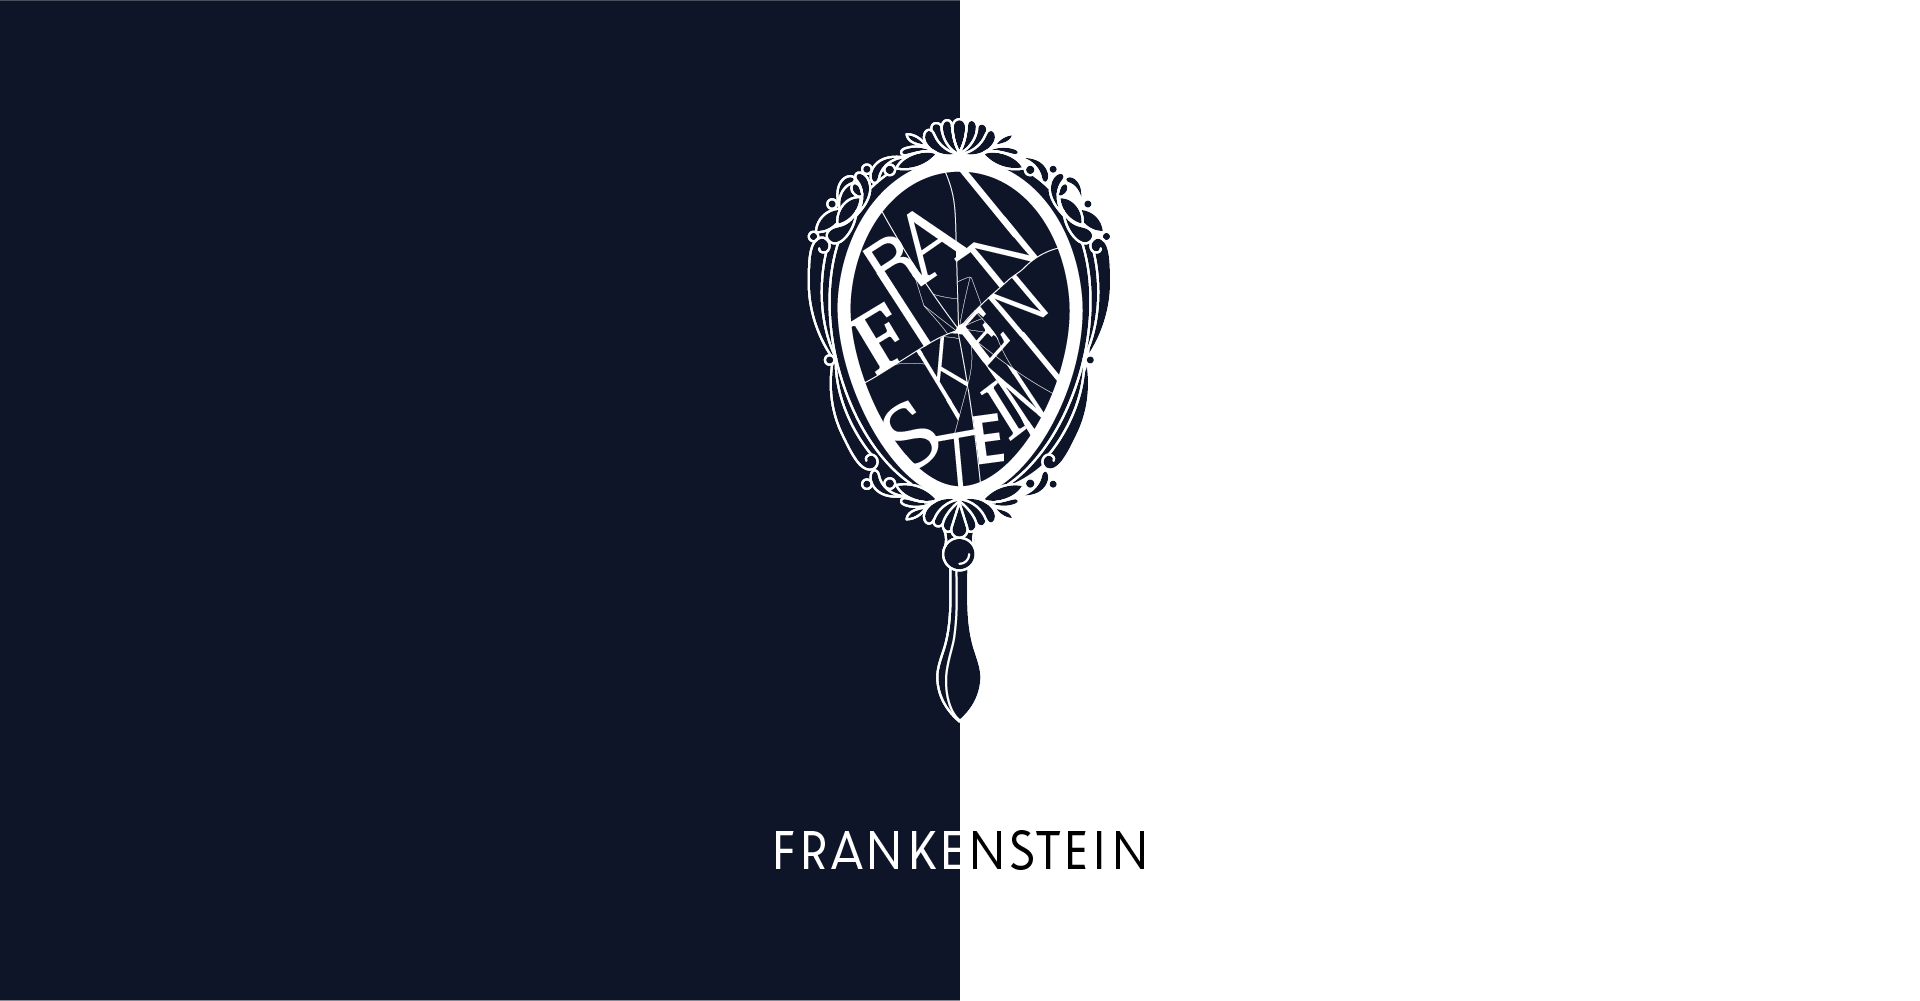 Logo for Frankenstein, featuring a broken hand mirror with the name of the book inside. The background is bisected down the middle with black on the left and white on the right.